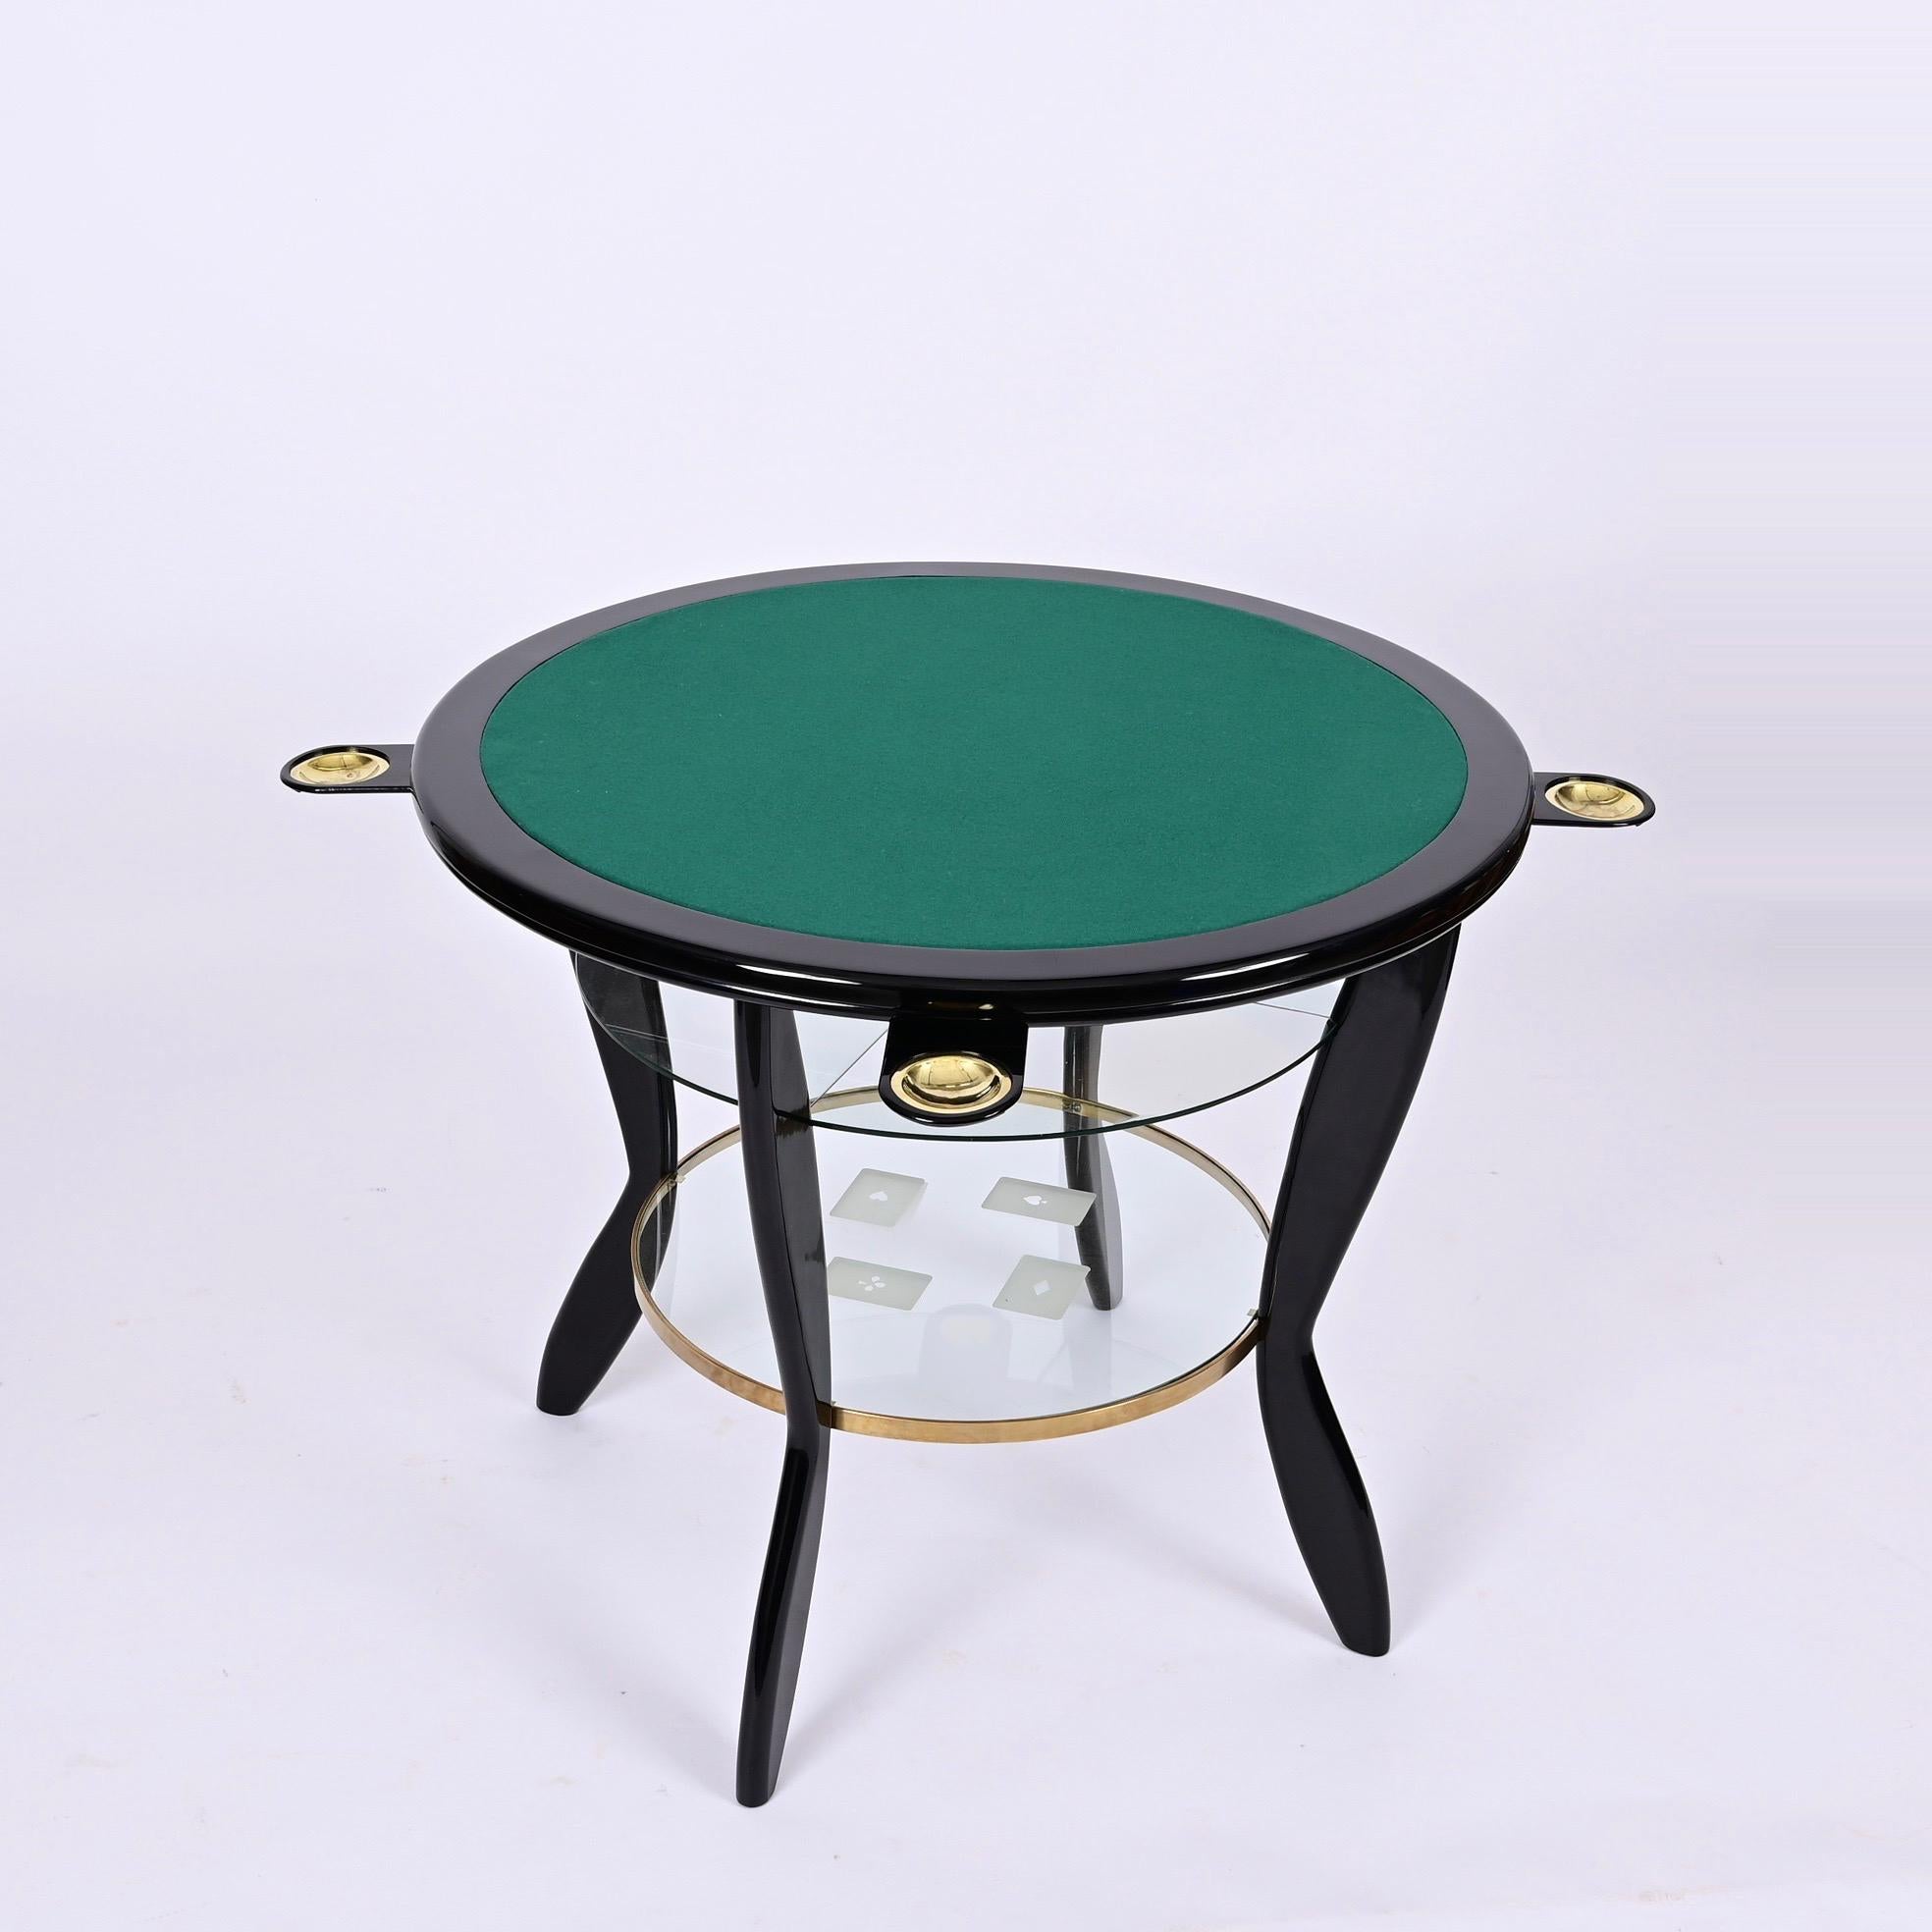 Mid-Century Modern Gio Ponti Style Ebonized Beech and Brass Italian Game Table with Glass, 1950s For Sale